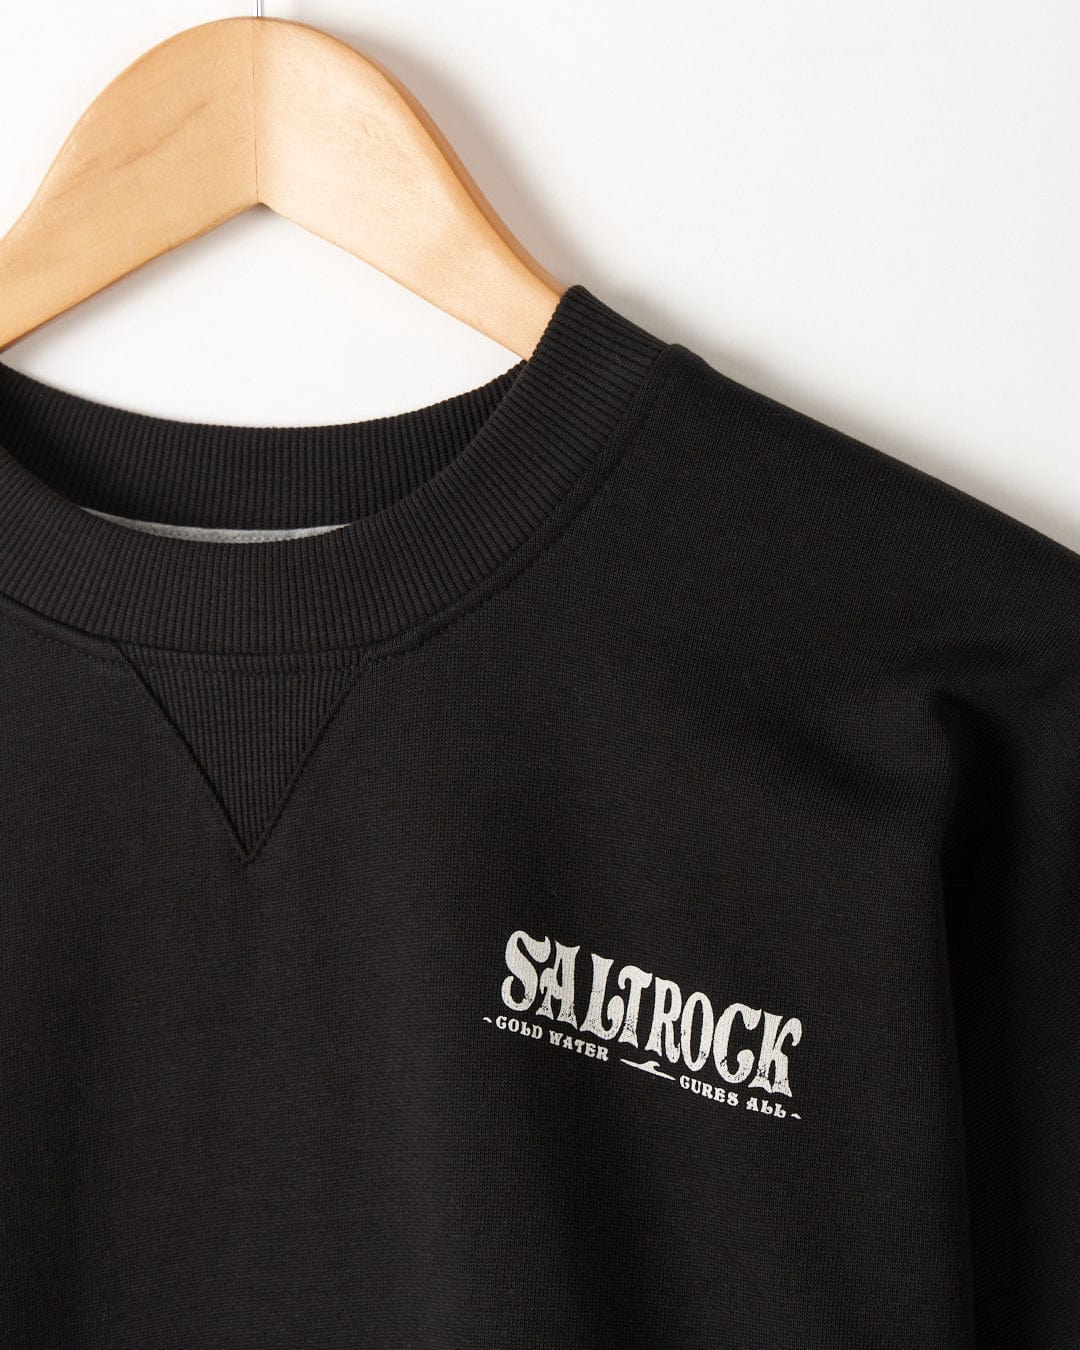 Black oversized T-shirt with "Saltrock - Cold Water - Mens Oversized Sweat - Black" logo, hanging on a wooden hanger against a white background.